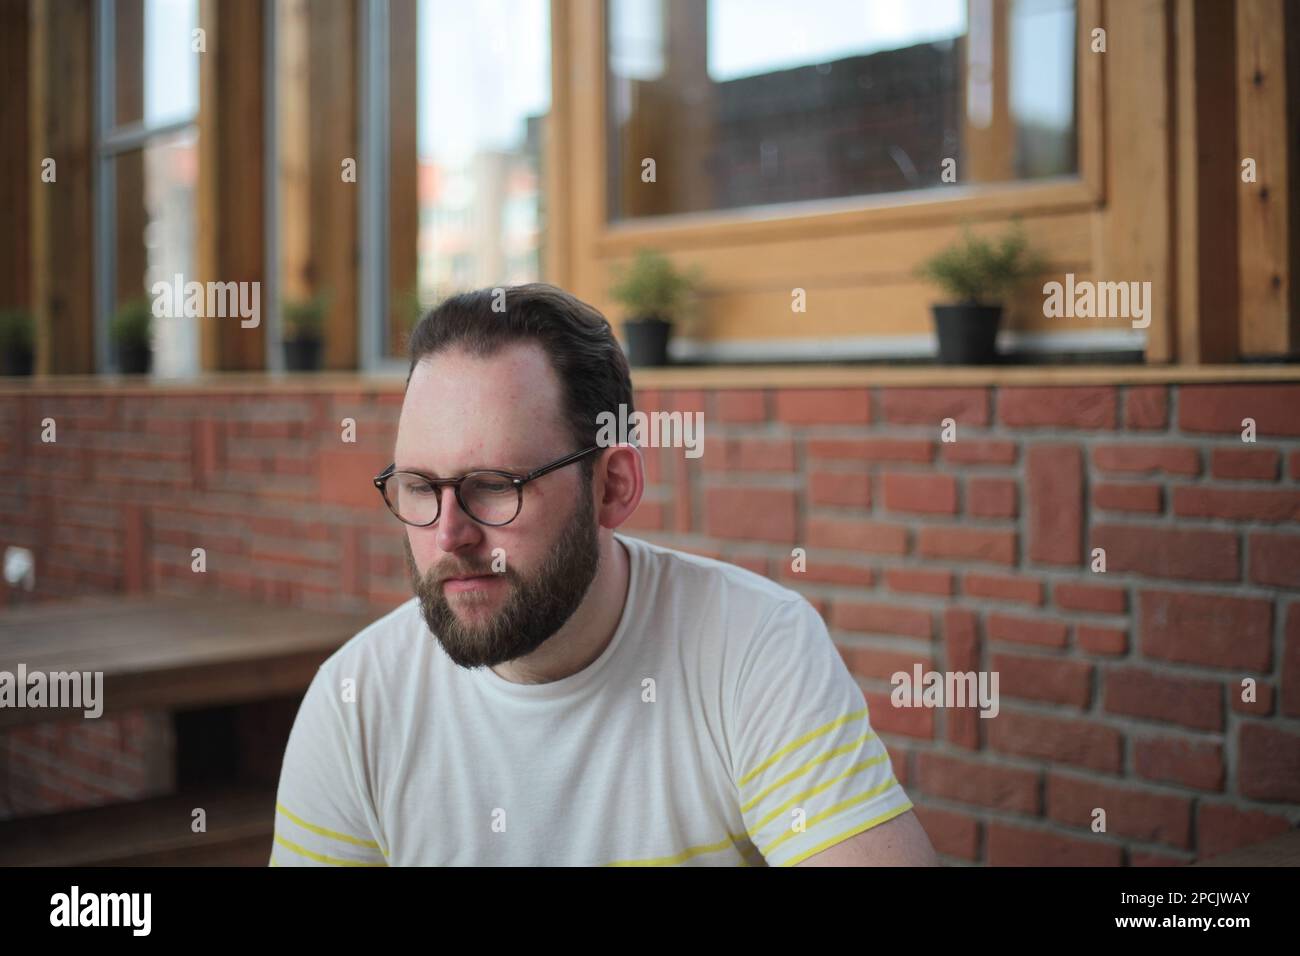 Man looking down at a coffee shop Stock Photo